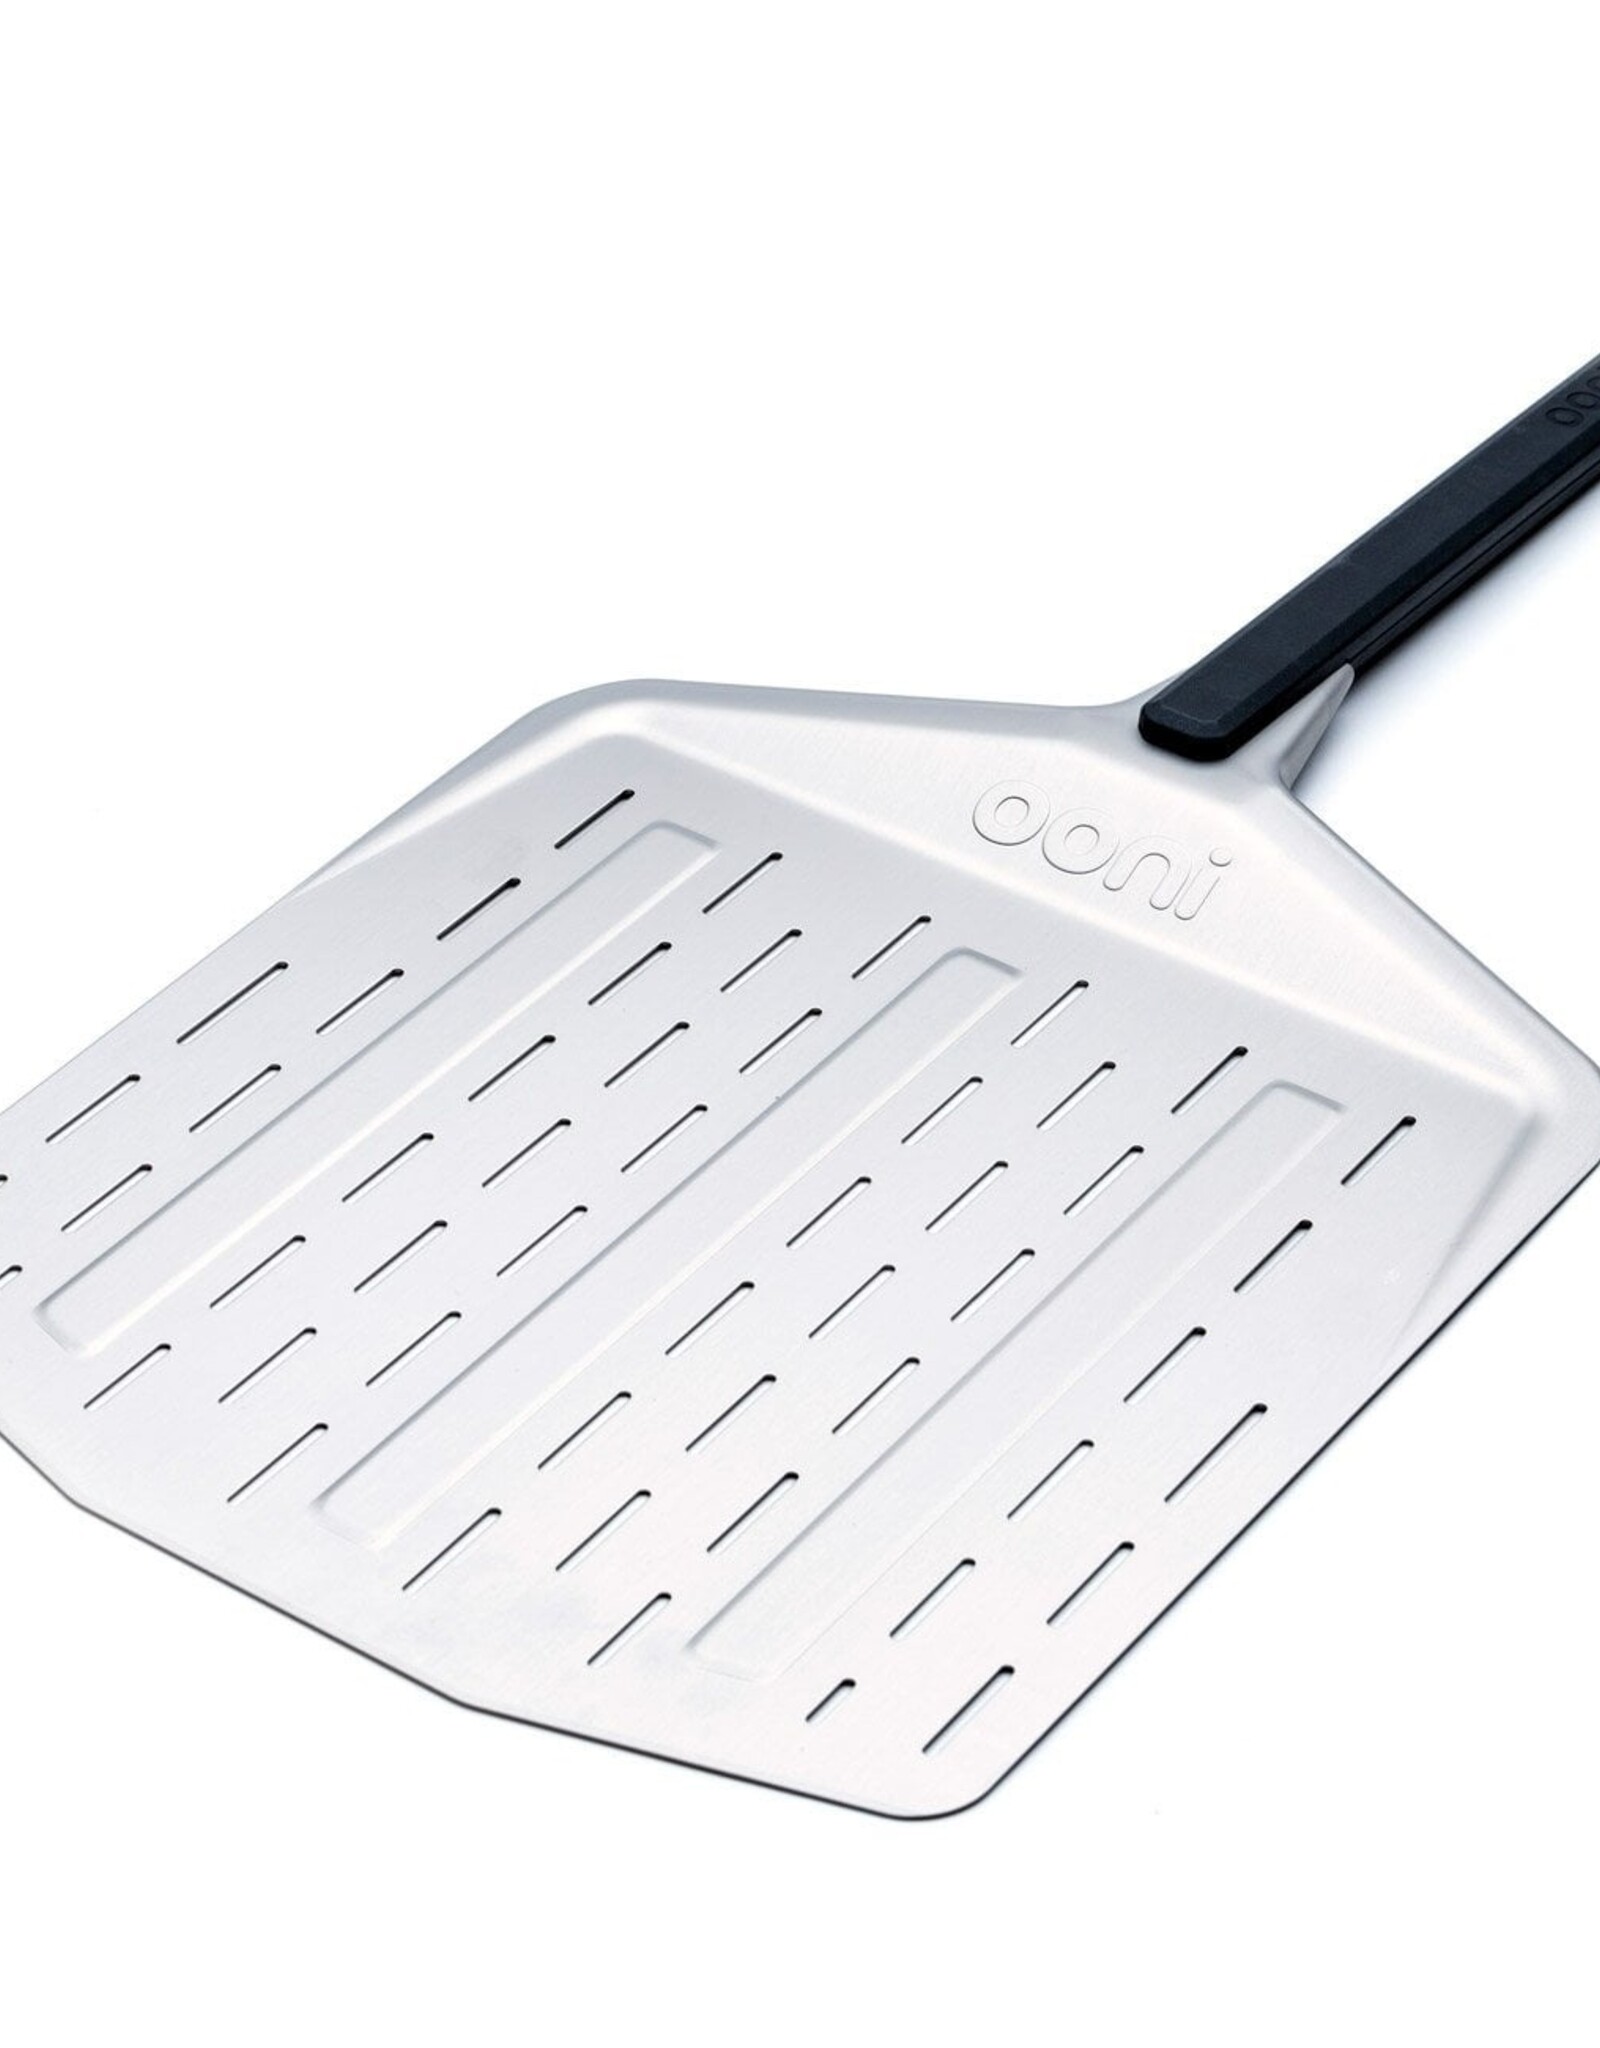 Ooni 12 inch Perforated Pizza Peel